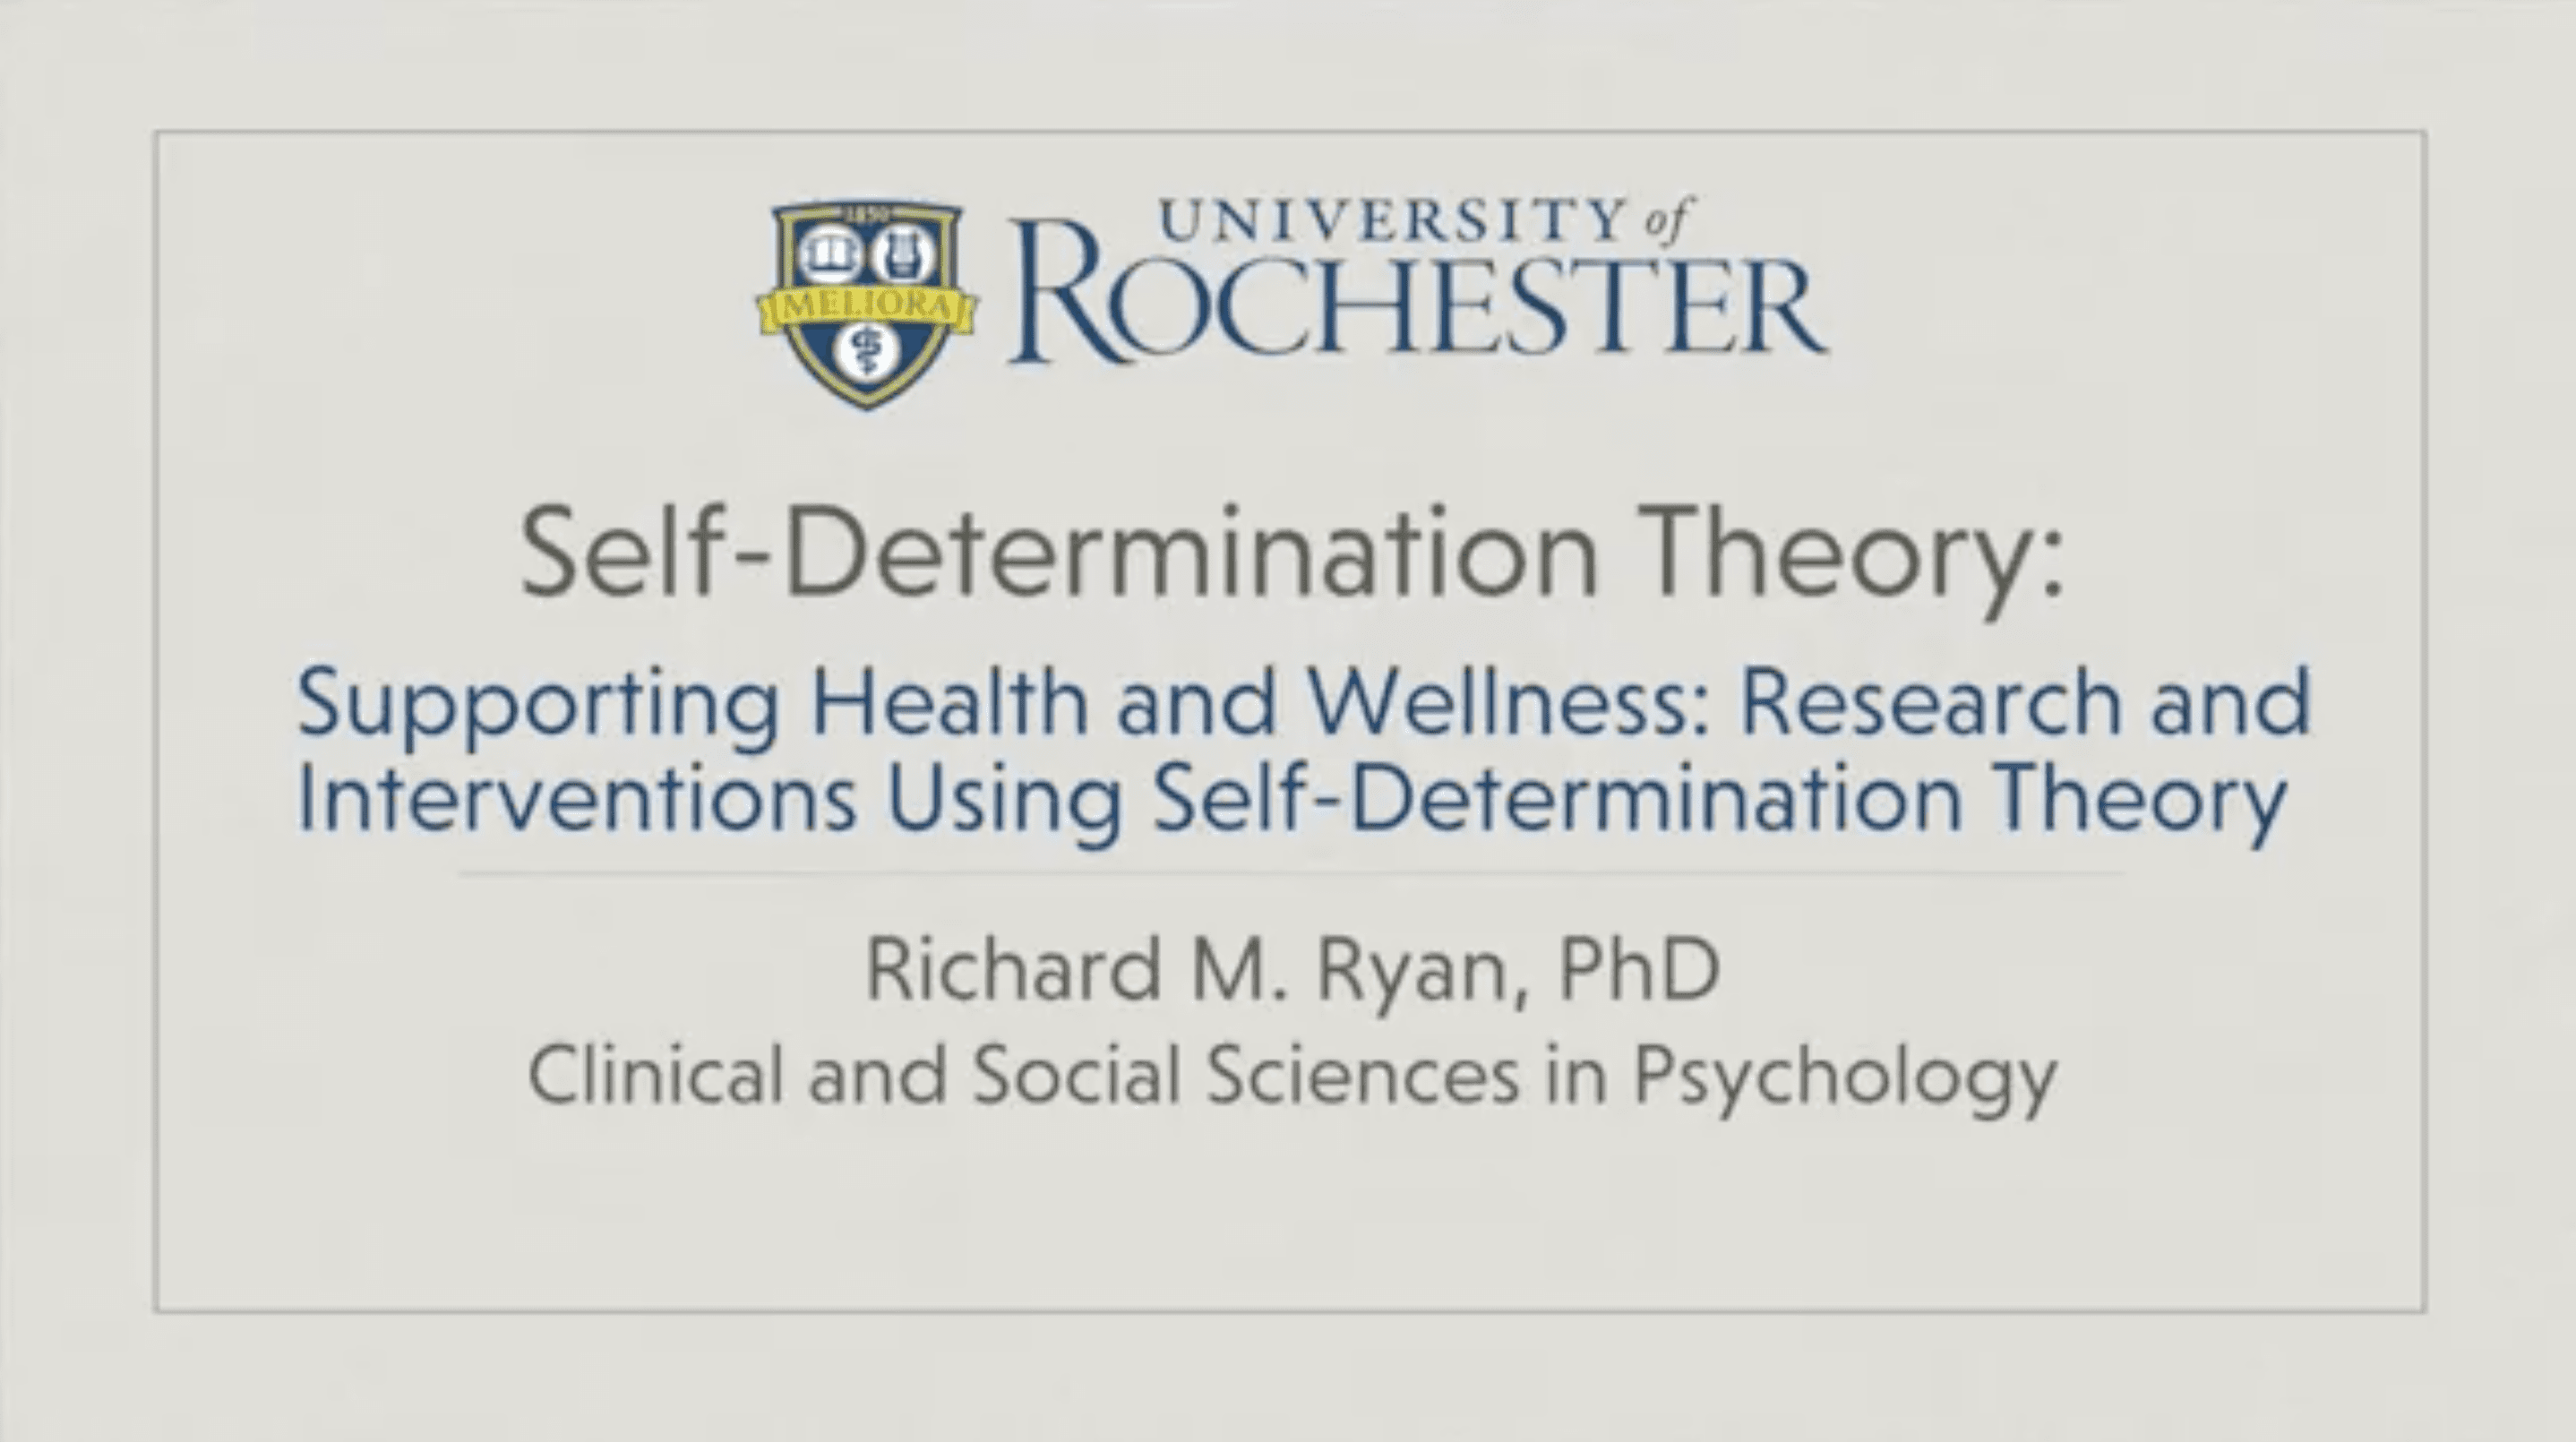 Supporting Health and Wellness Coursera video with Richard M Ryan